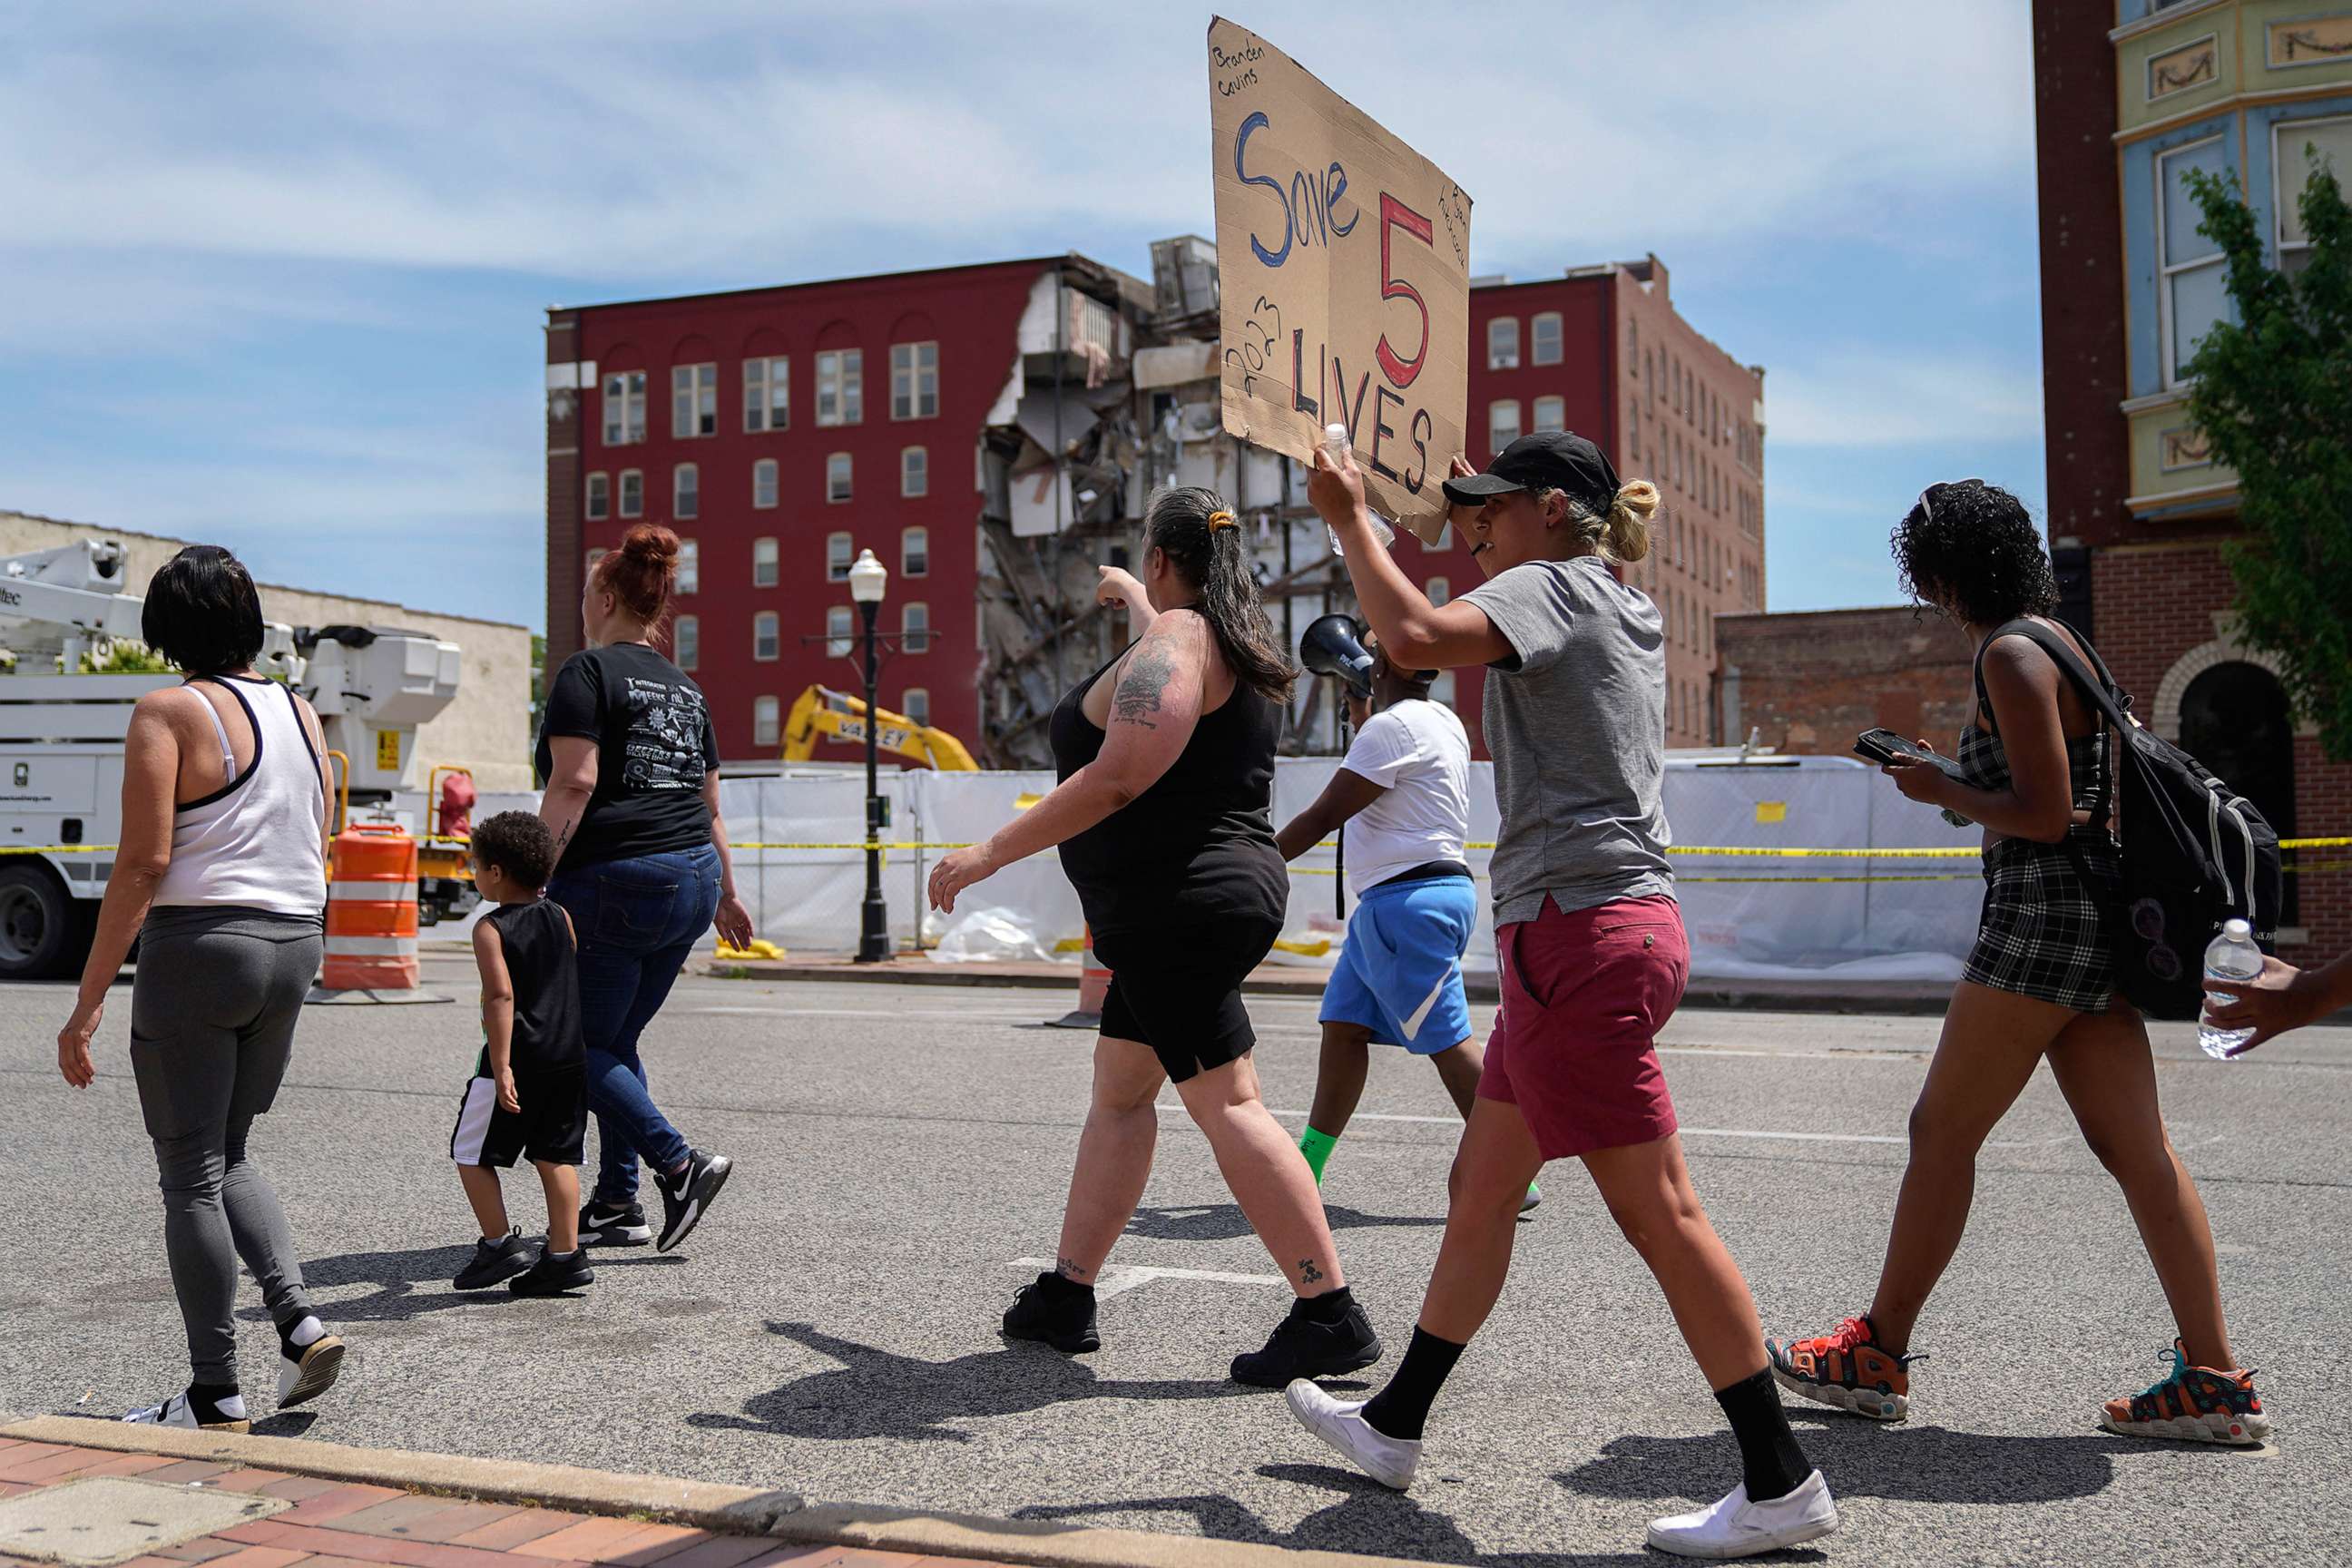 PHOTO: Protesters march in the street near the apartment building that partially collapsed in Davenport, Iowa, May 31, 2023.